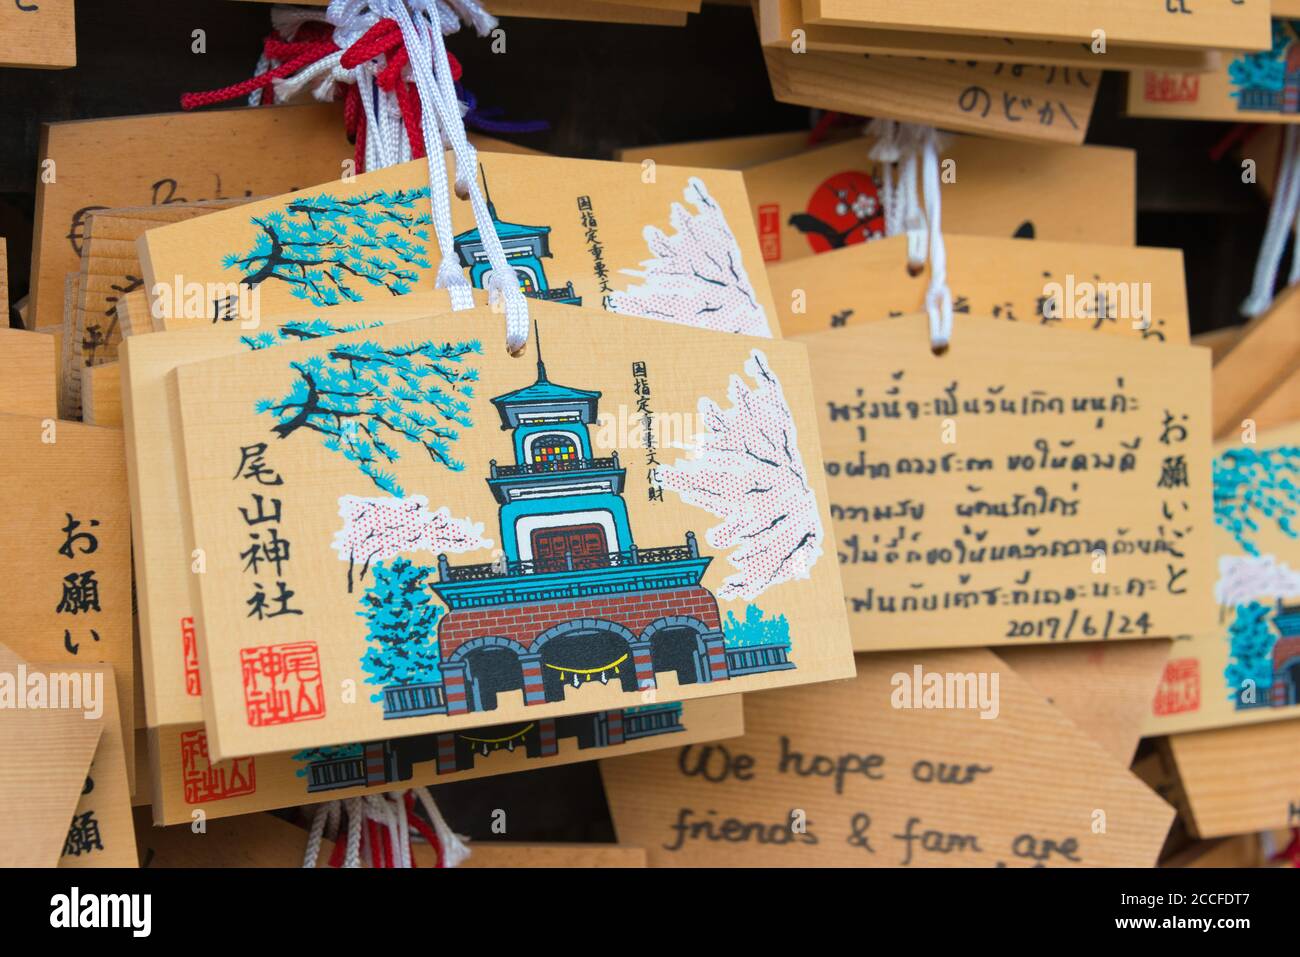 Japanese votive plaque(Ema) hanging in Oyama Shrine in Kanazawa, Ishikawa, Japan. Ema are small wooden plaques used for wishes by shinto believers. Stock Photo